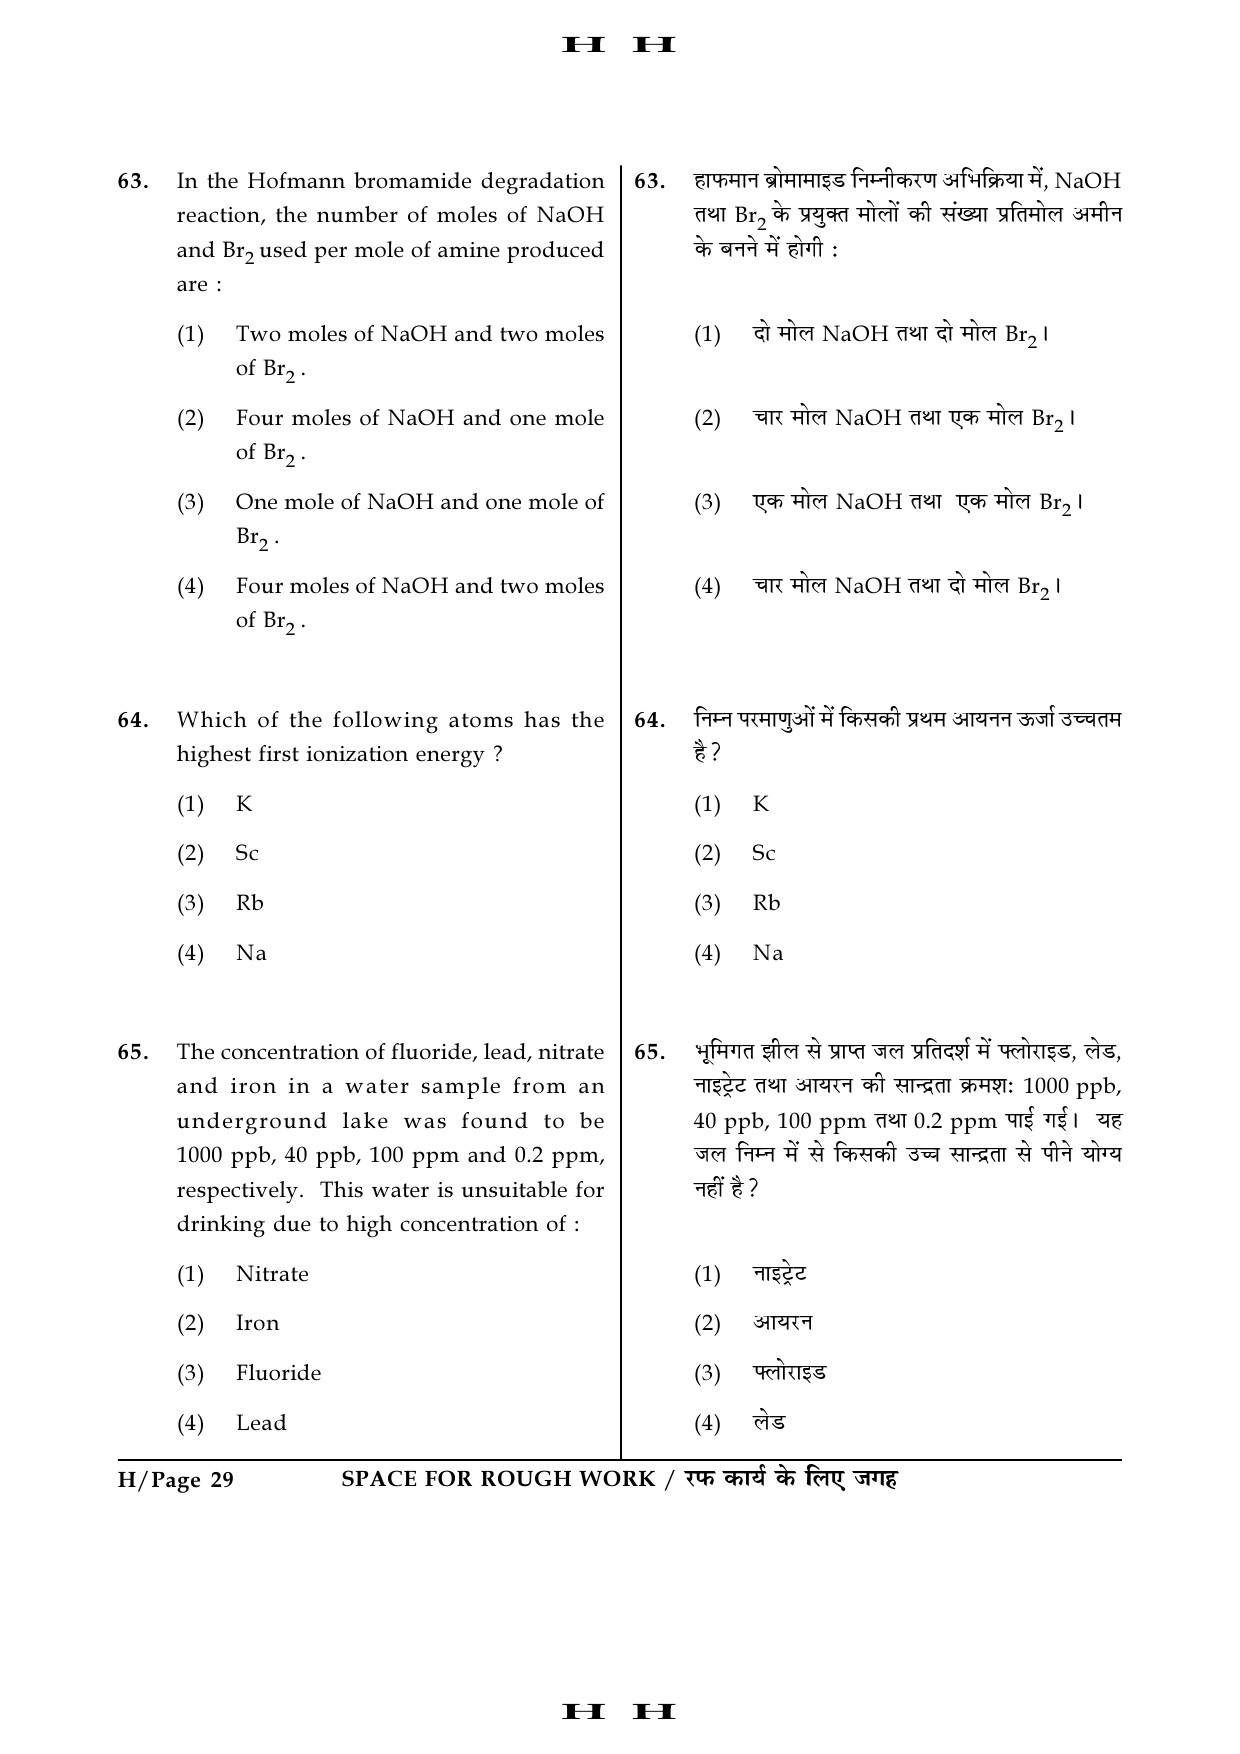 JEE Main Exam Question Paper 2016 Booklet H 29